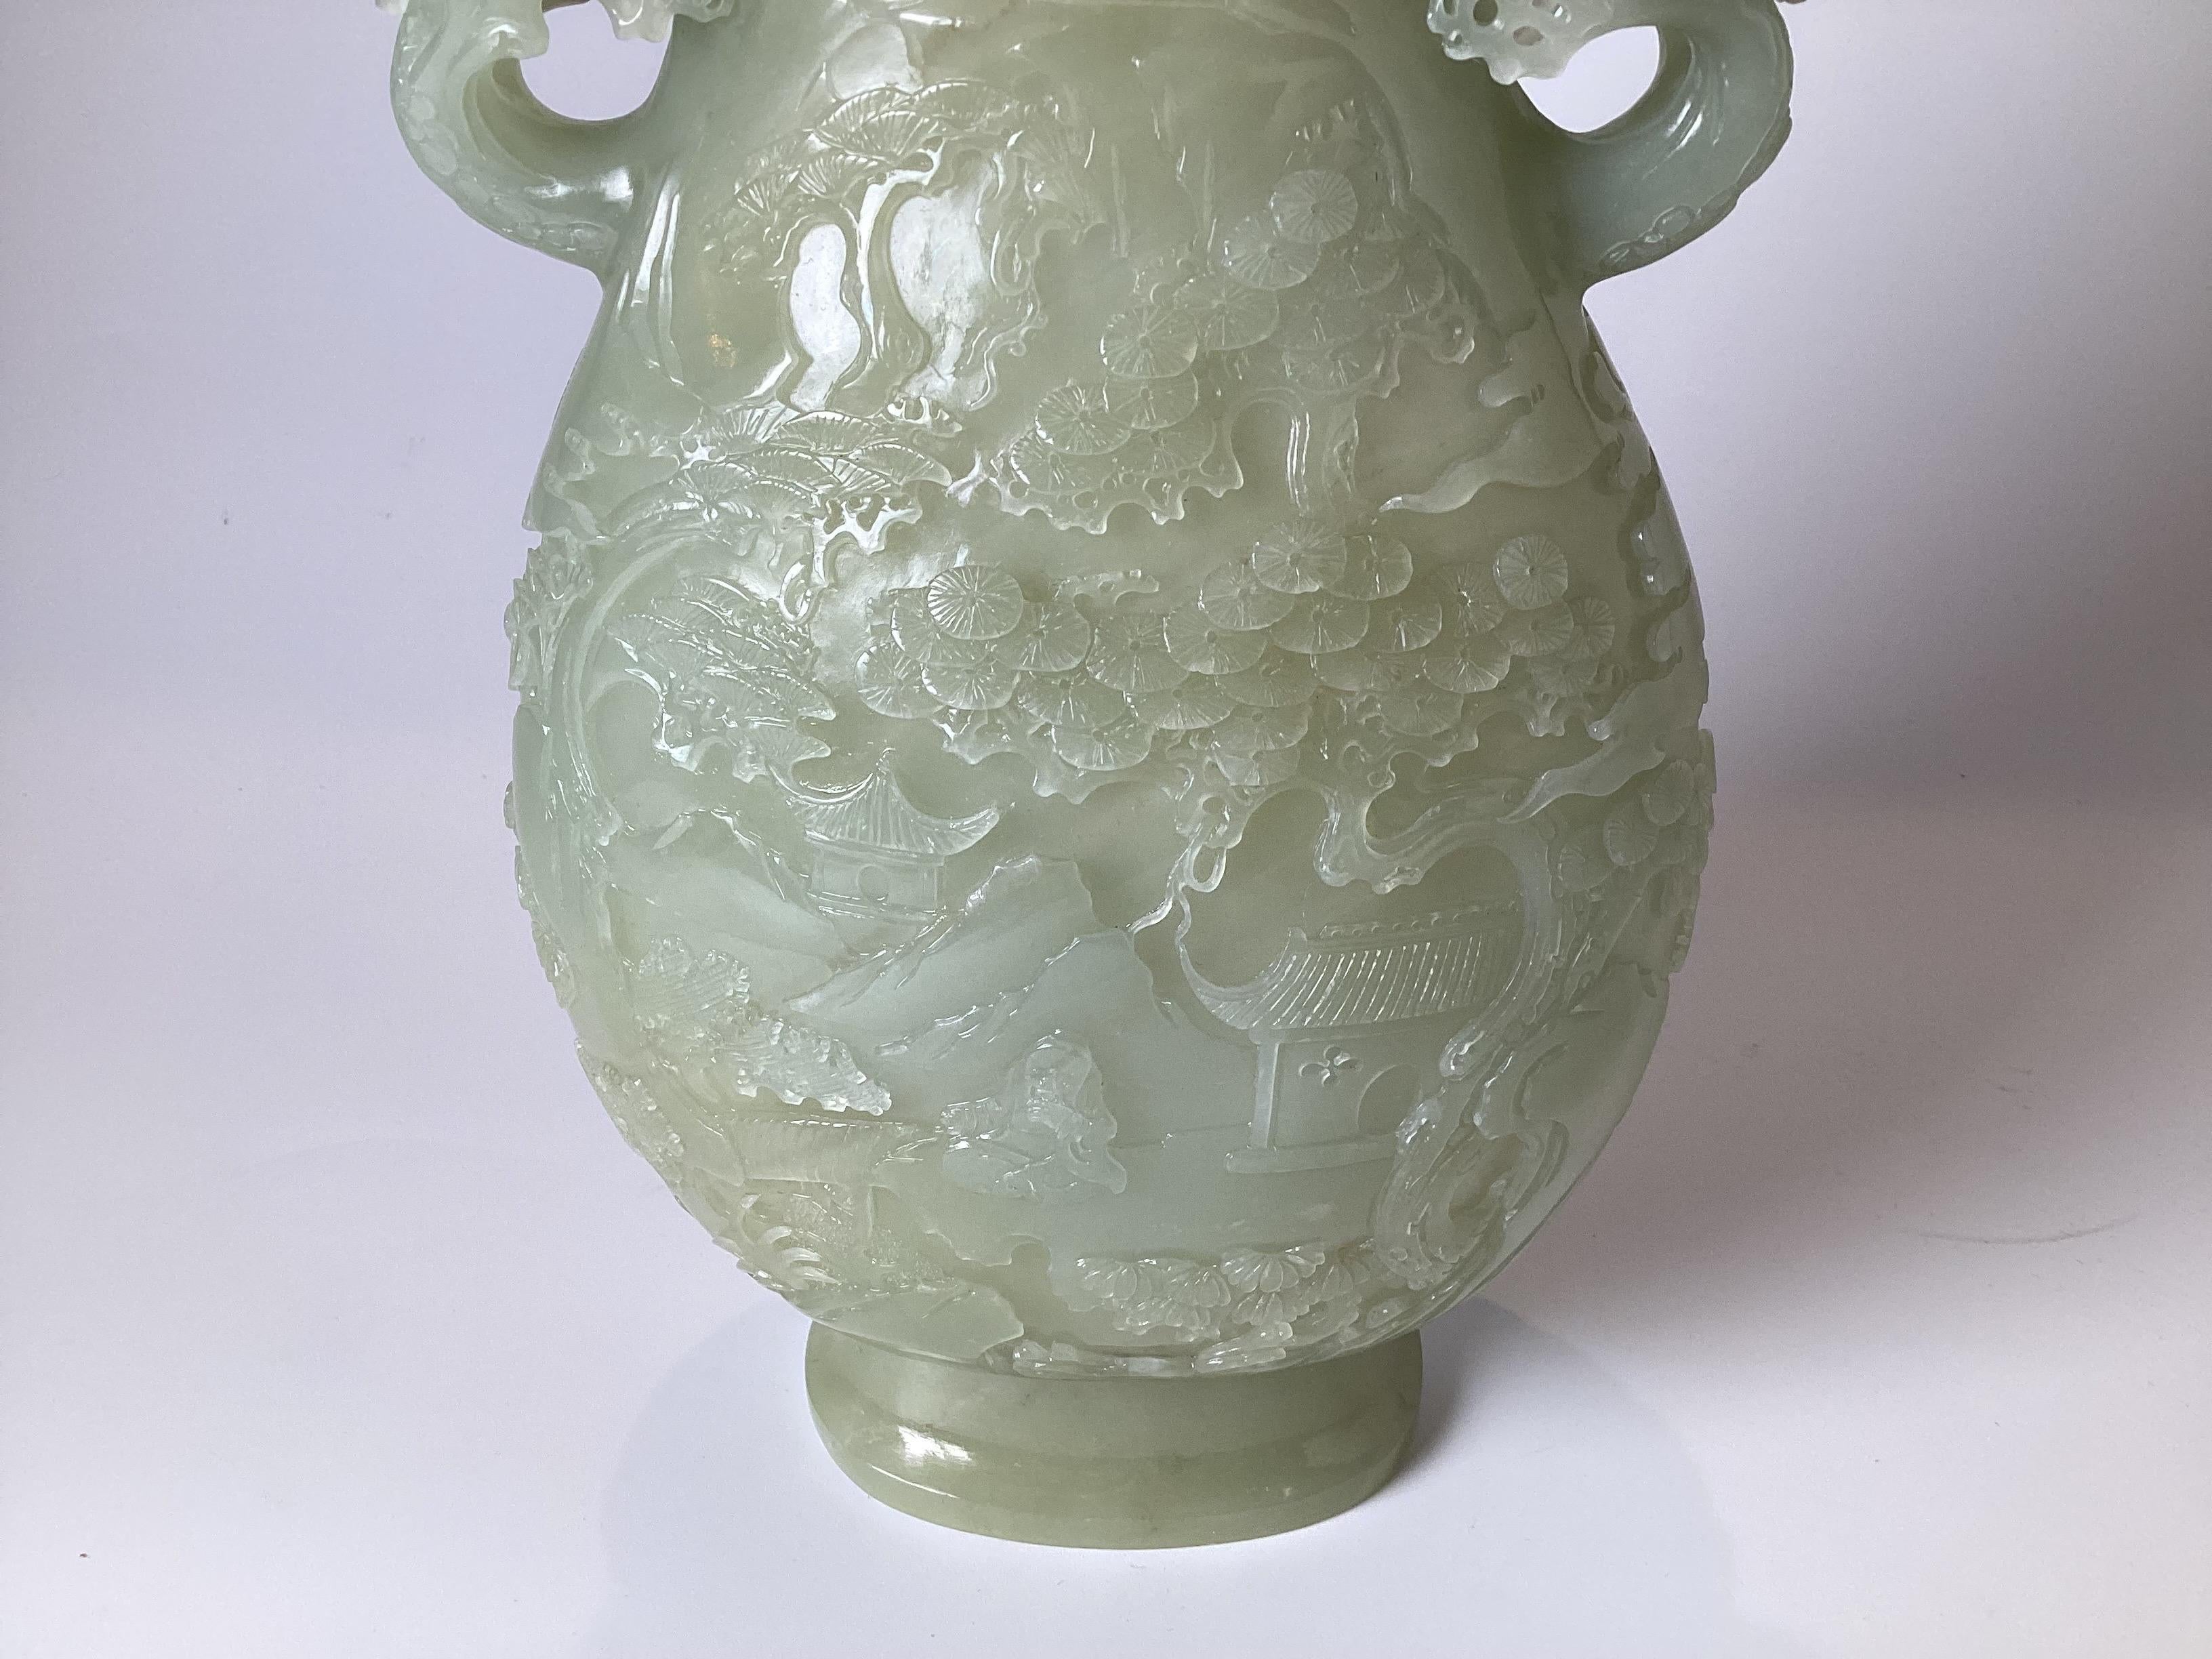 An intricately carve celadon nephrite jade covered vessel. The lid with finial on a slender neck with bulbous botton, with handles on each side.